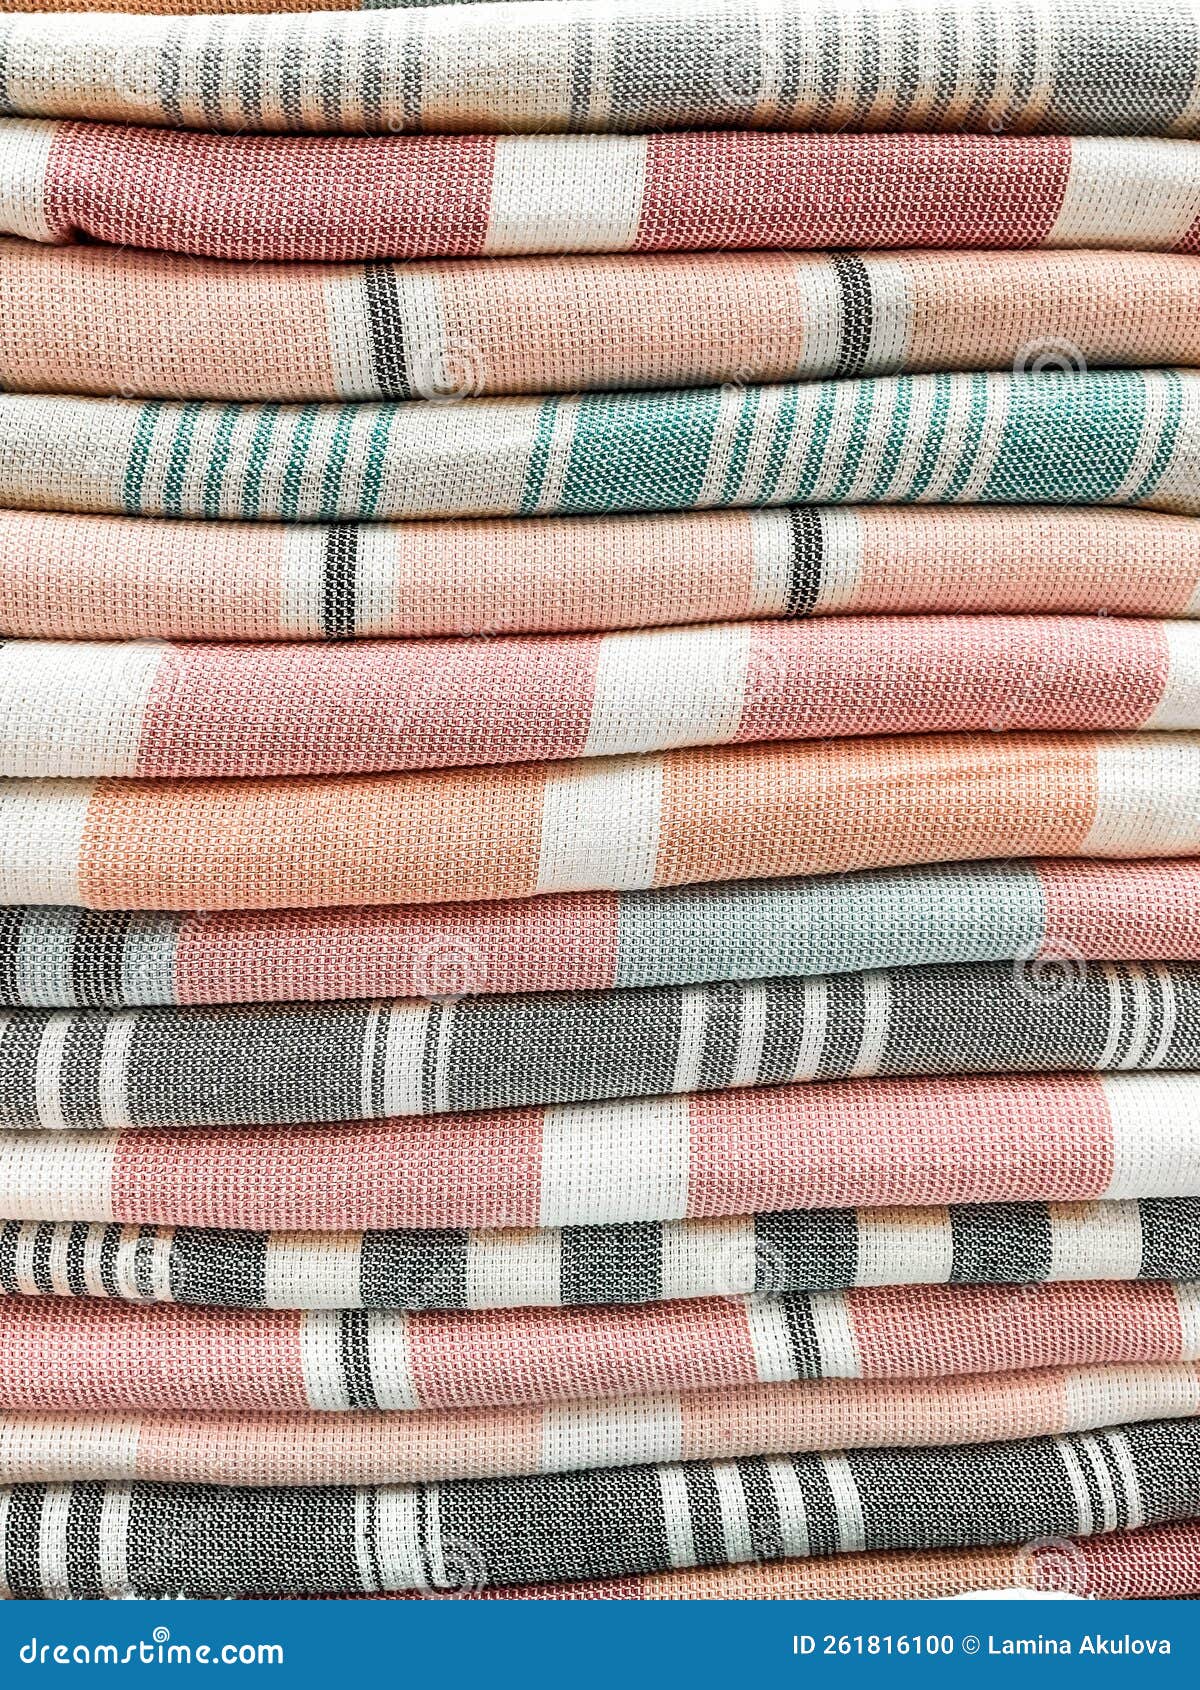 stack of towels. colorful turkish towels. colored terry